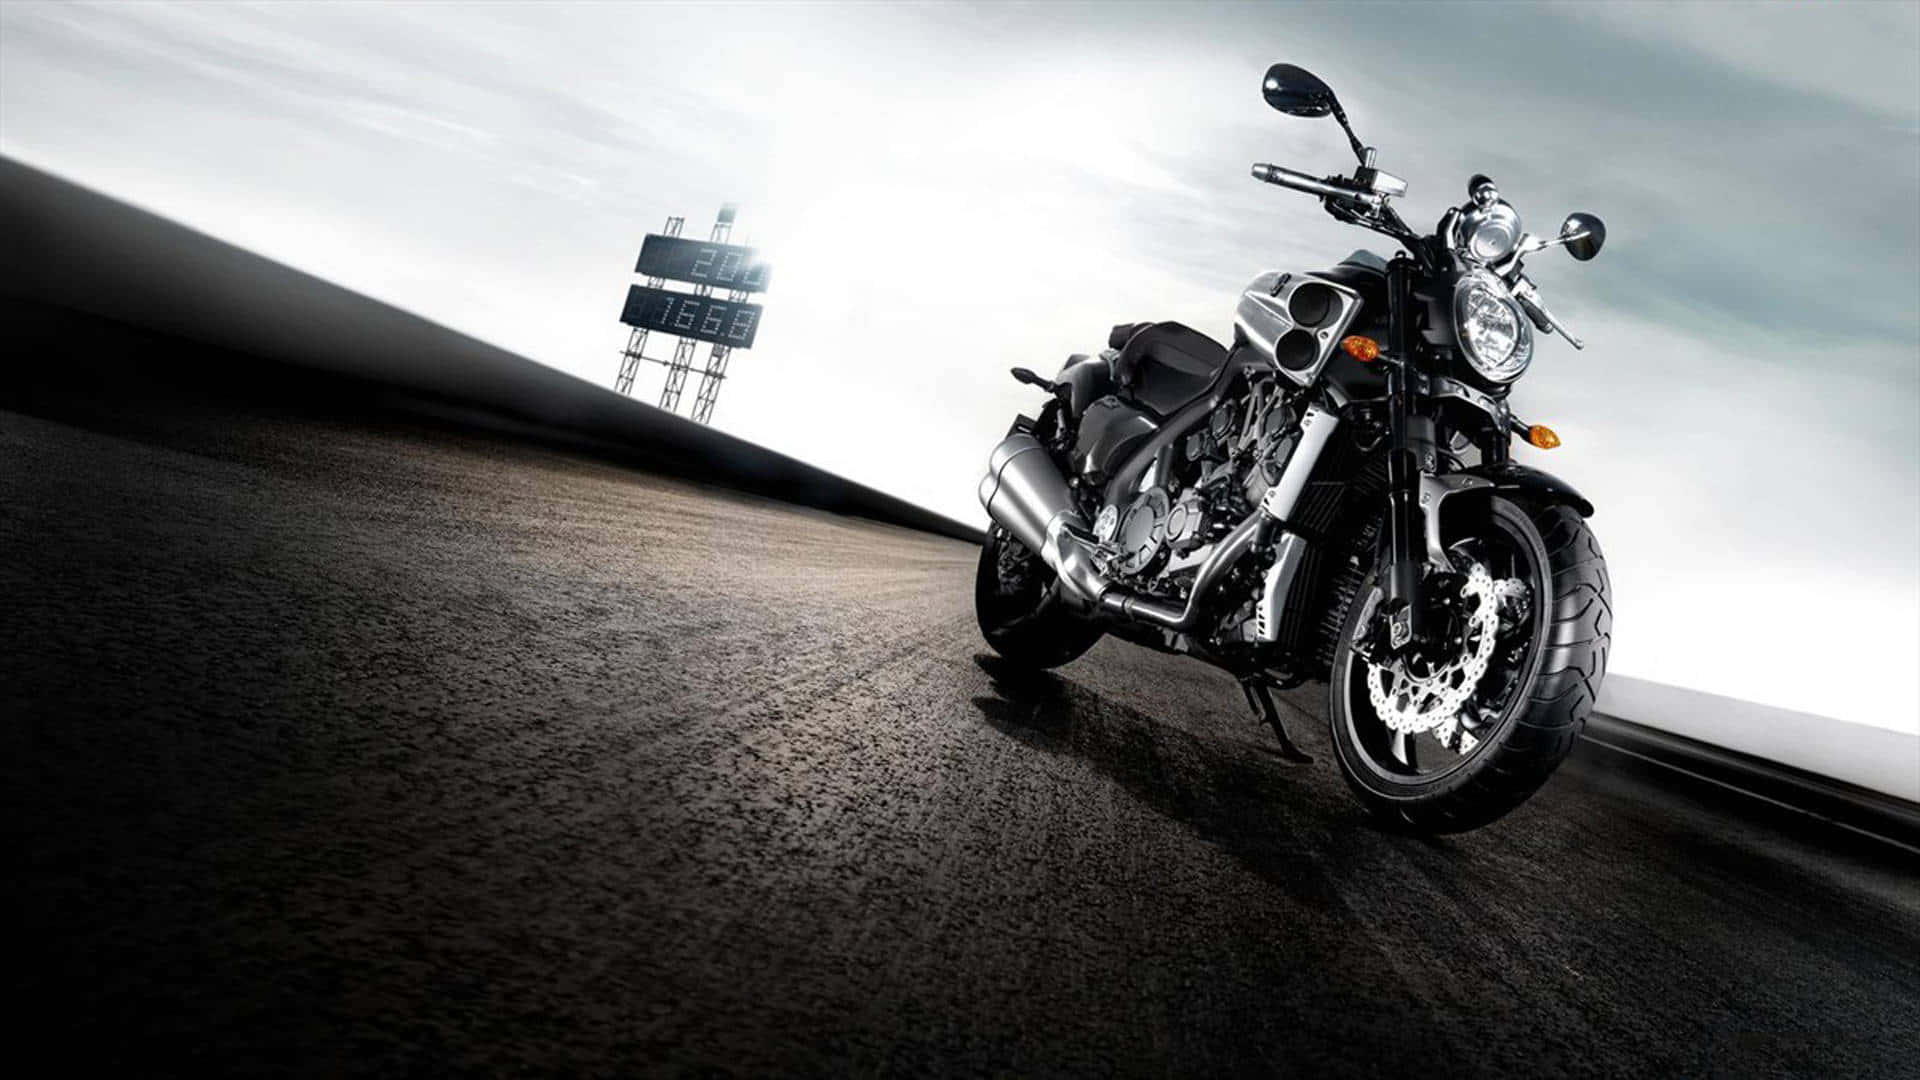 Take a ride on the open road with HD Bikes!